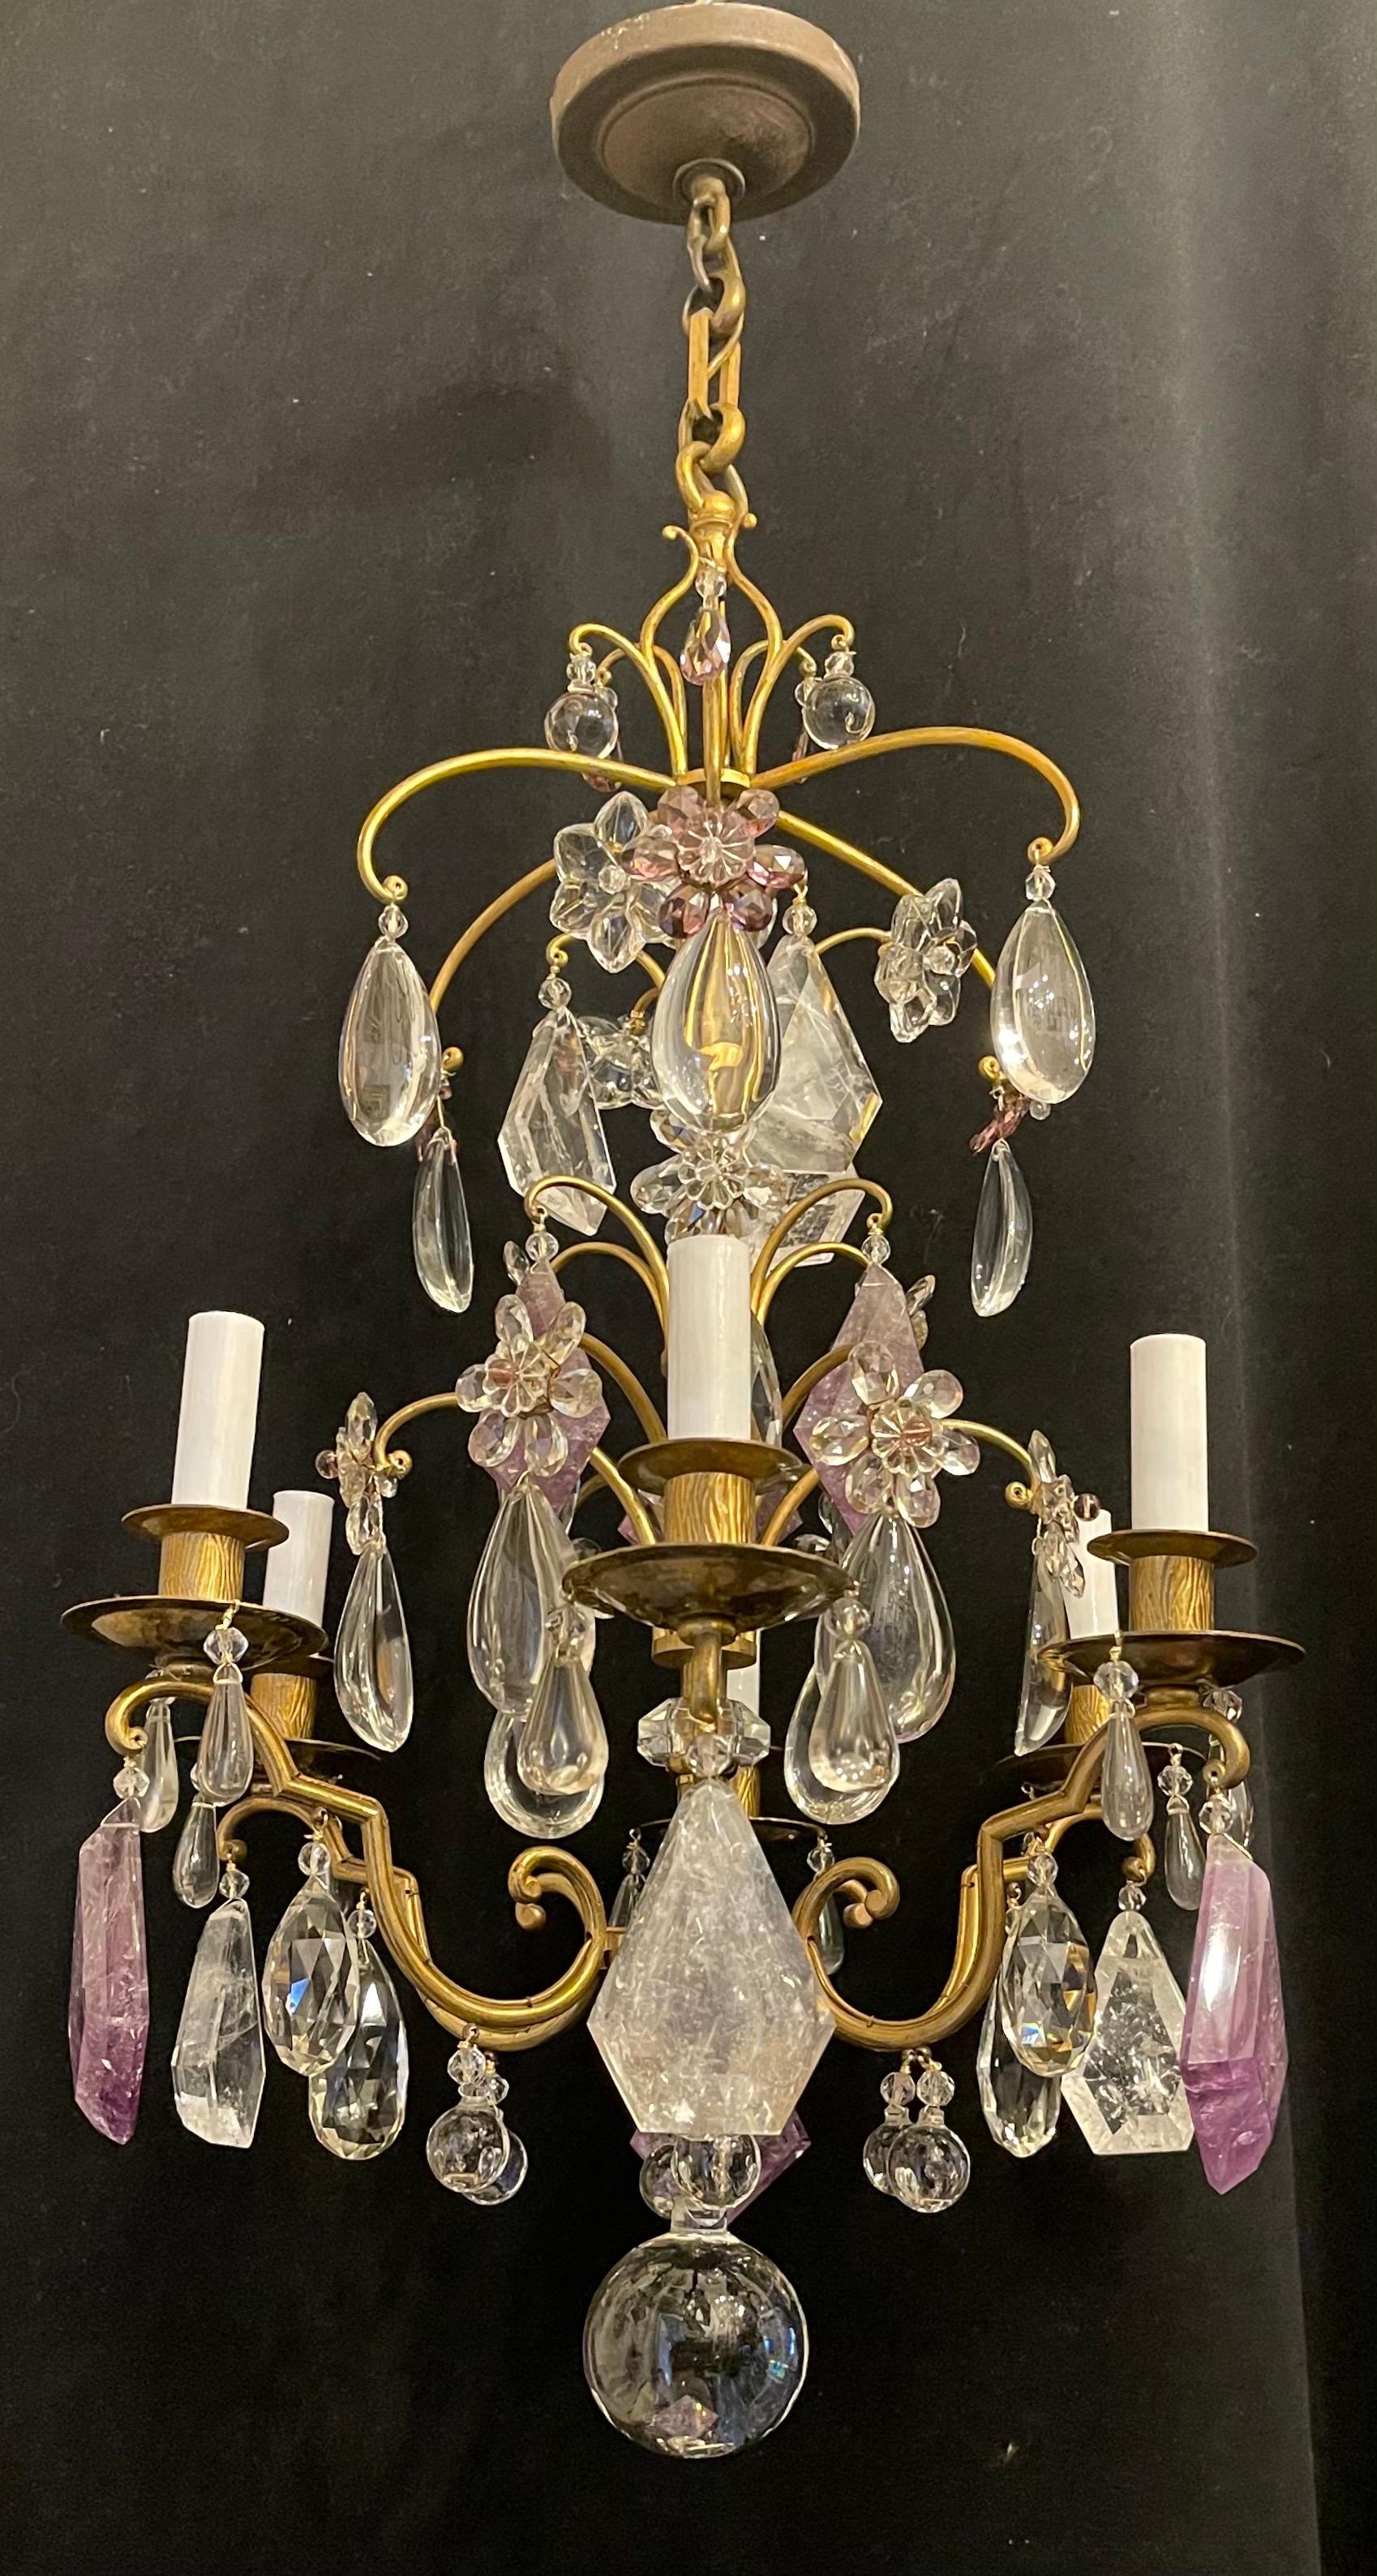 A wonderful French bronze Bagues style amethyst & frosted rock crystal dressed with crystal flowers 6 candelabra light chandelier, rewired and accompanied by chain canopy and mounting hardware.